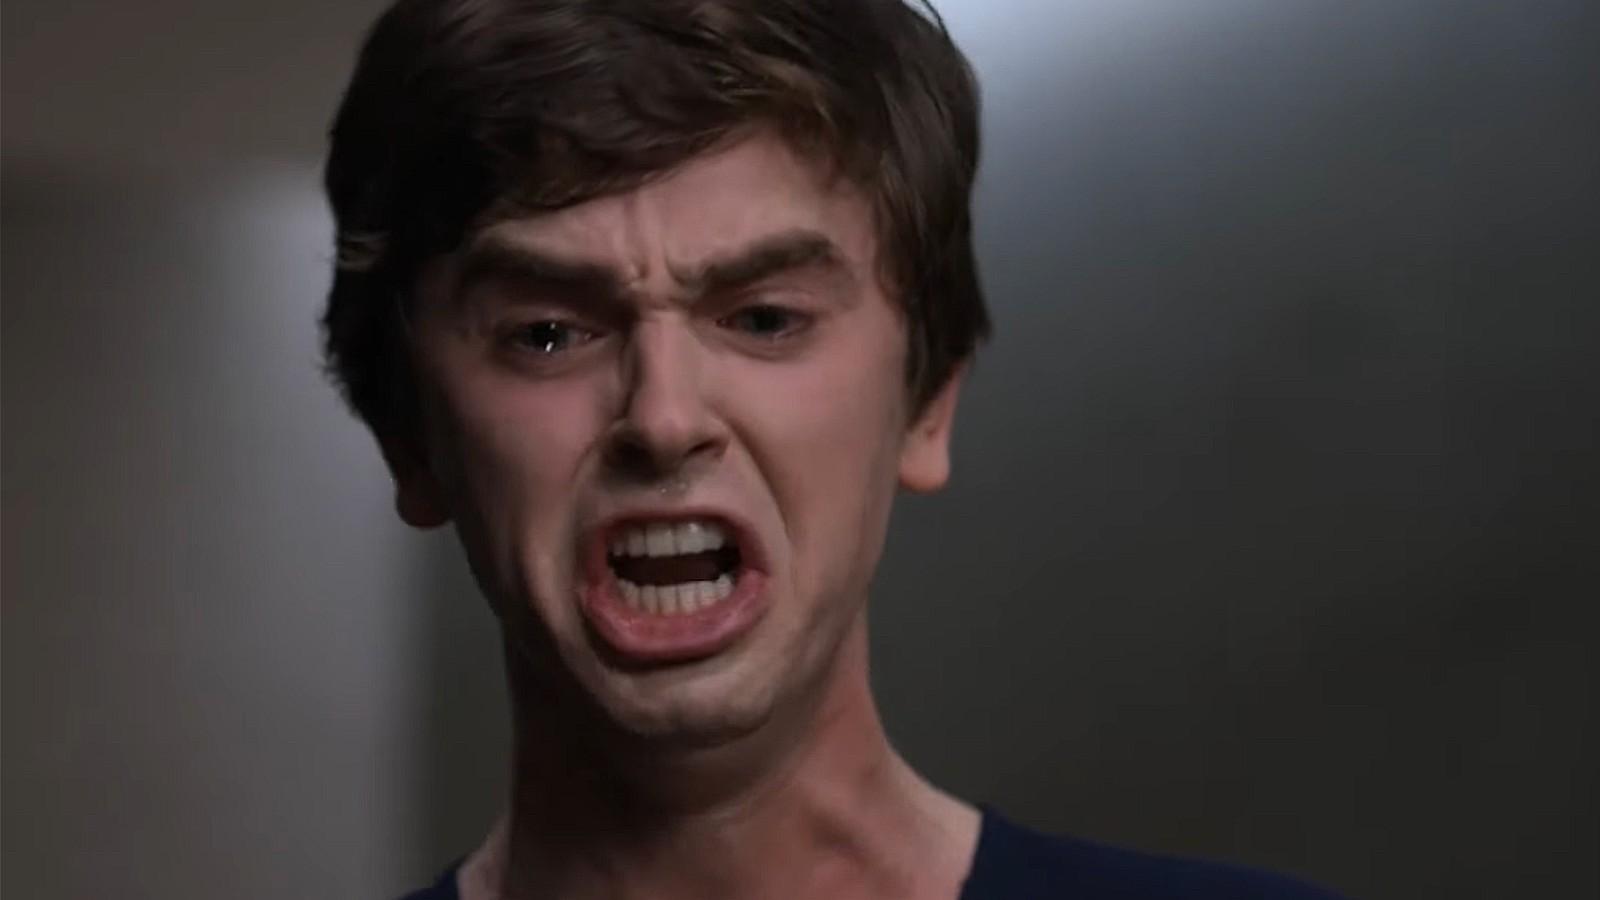 Freddie Highmore in the viral "I am a surgeon" clip from The Good Doctor